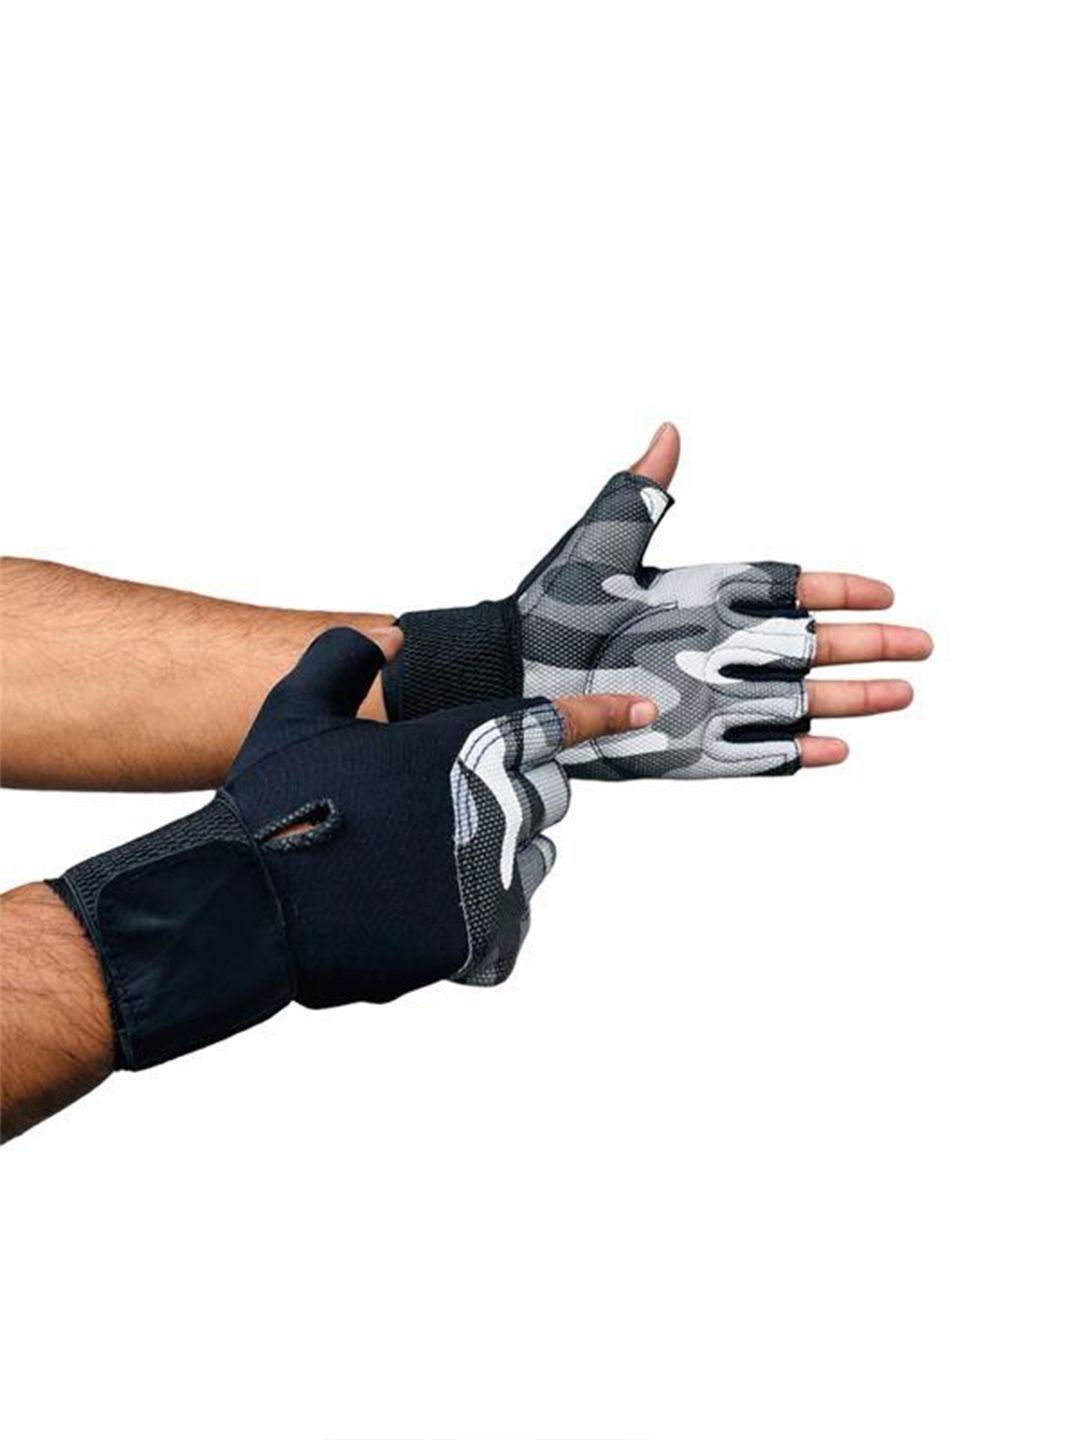 body smith printed gym gloves with wrist support